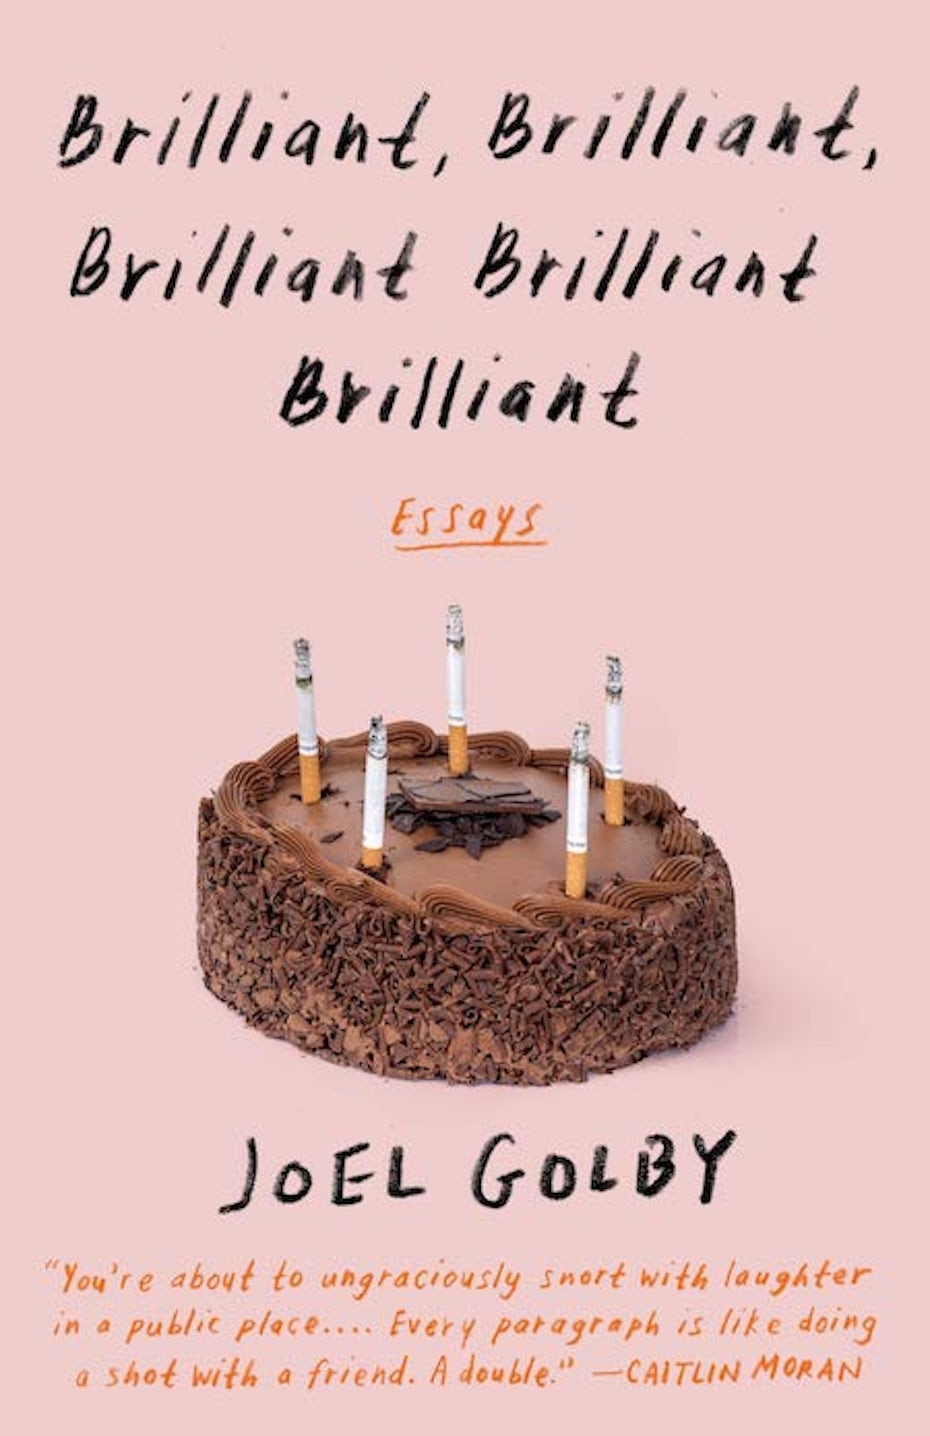 book cover trends 2020 example with handwritten pencil type and cake topped with cigarettes